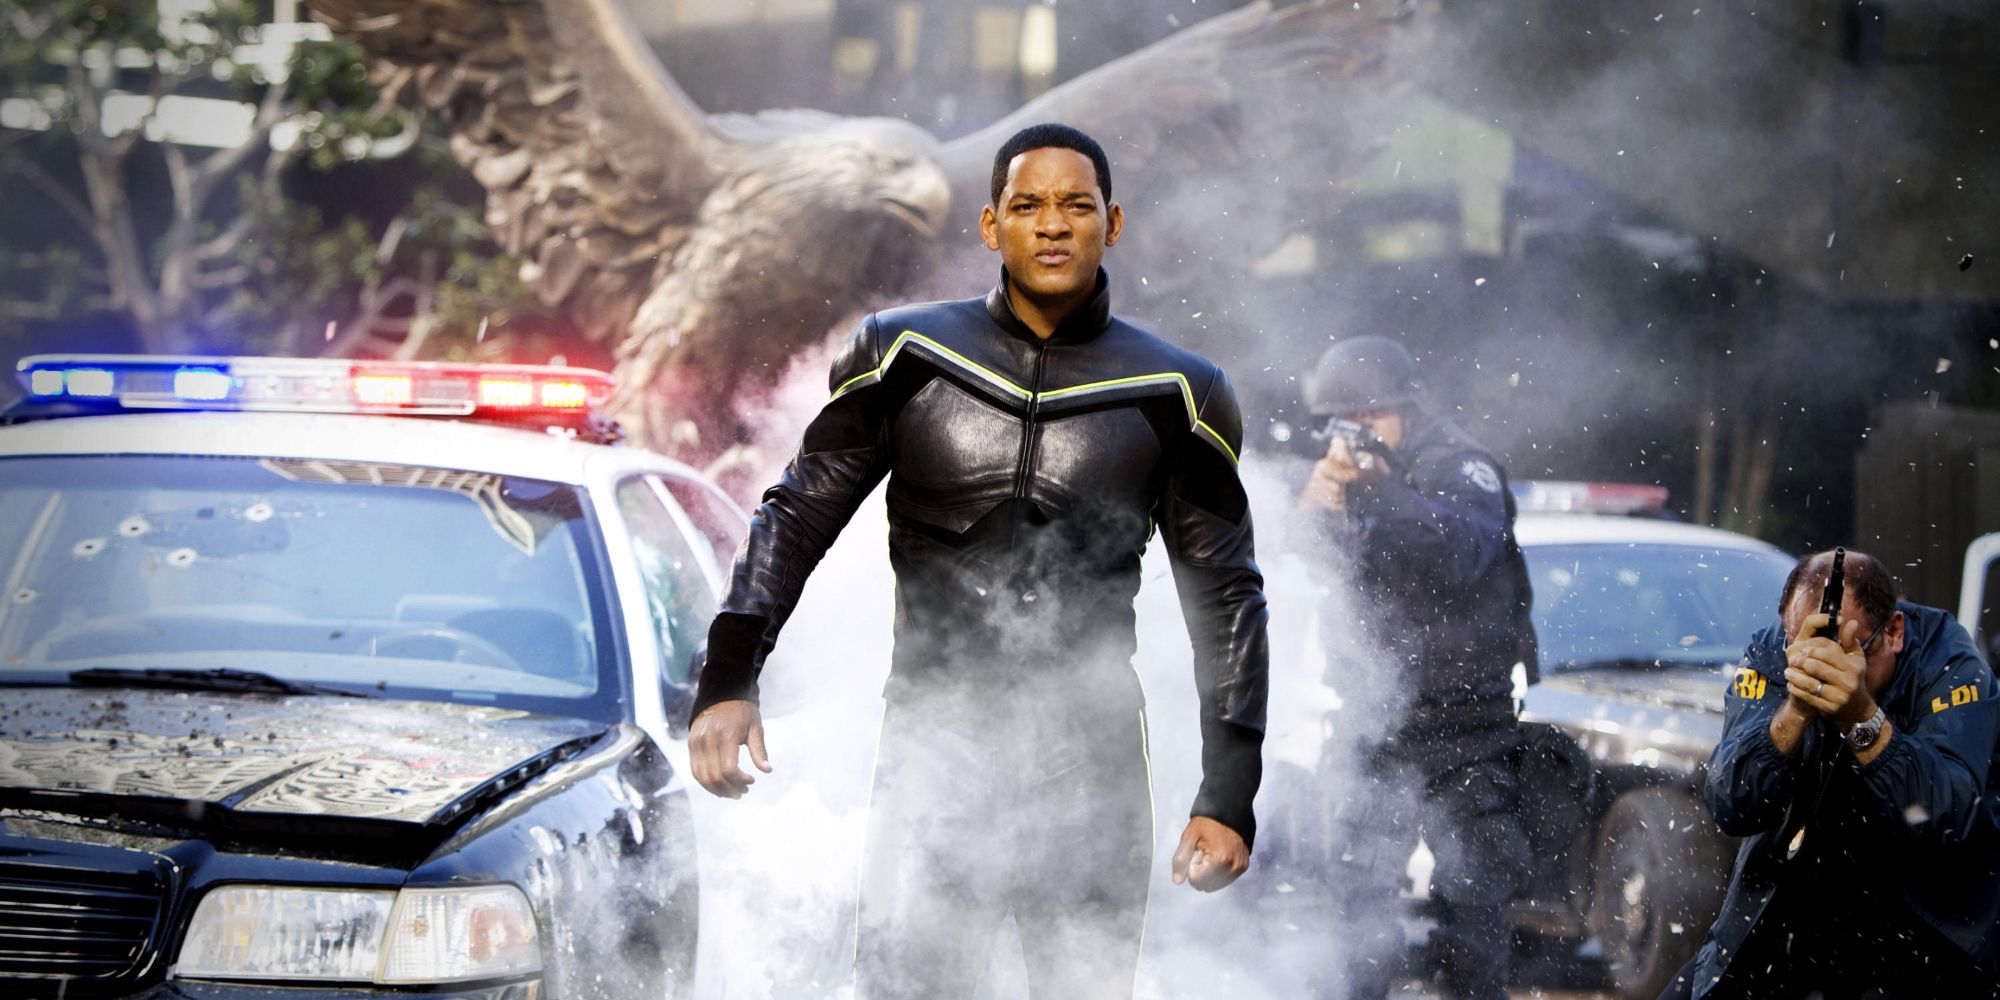 will smith playing the role of hancock